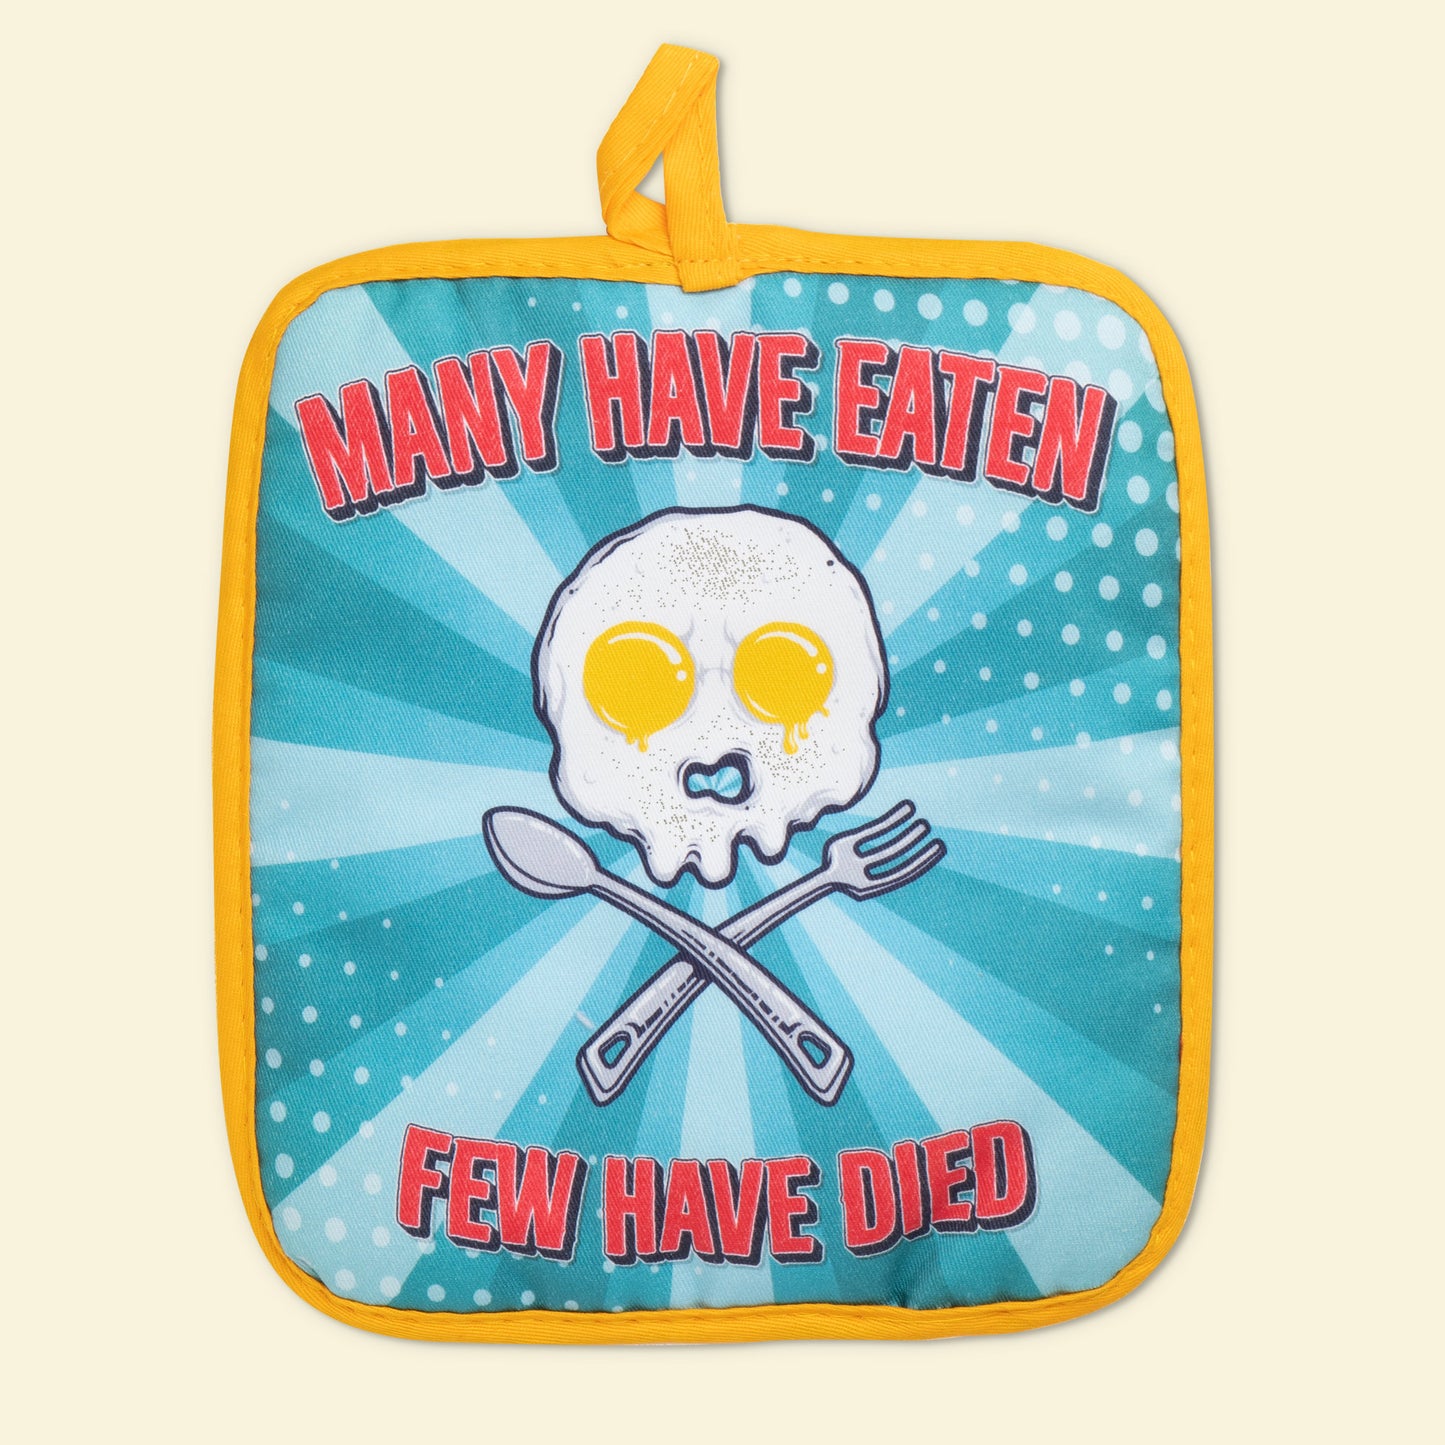 Many Have Eaten Few Have Died Oven Potholder funny